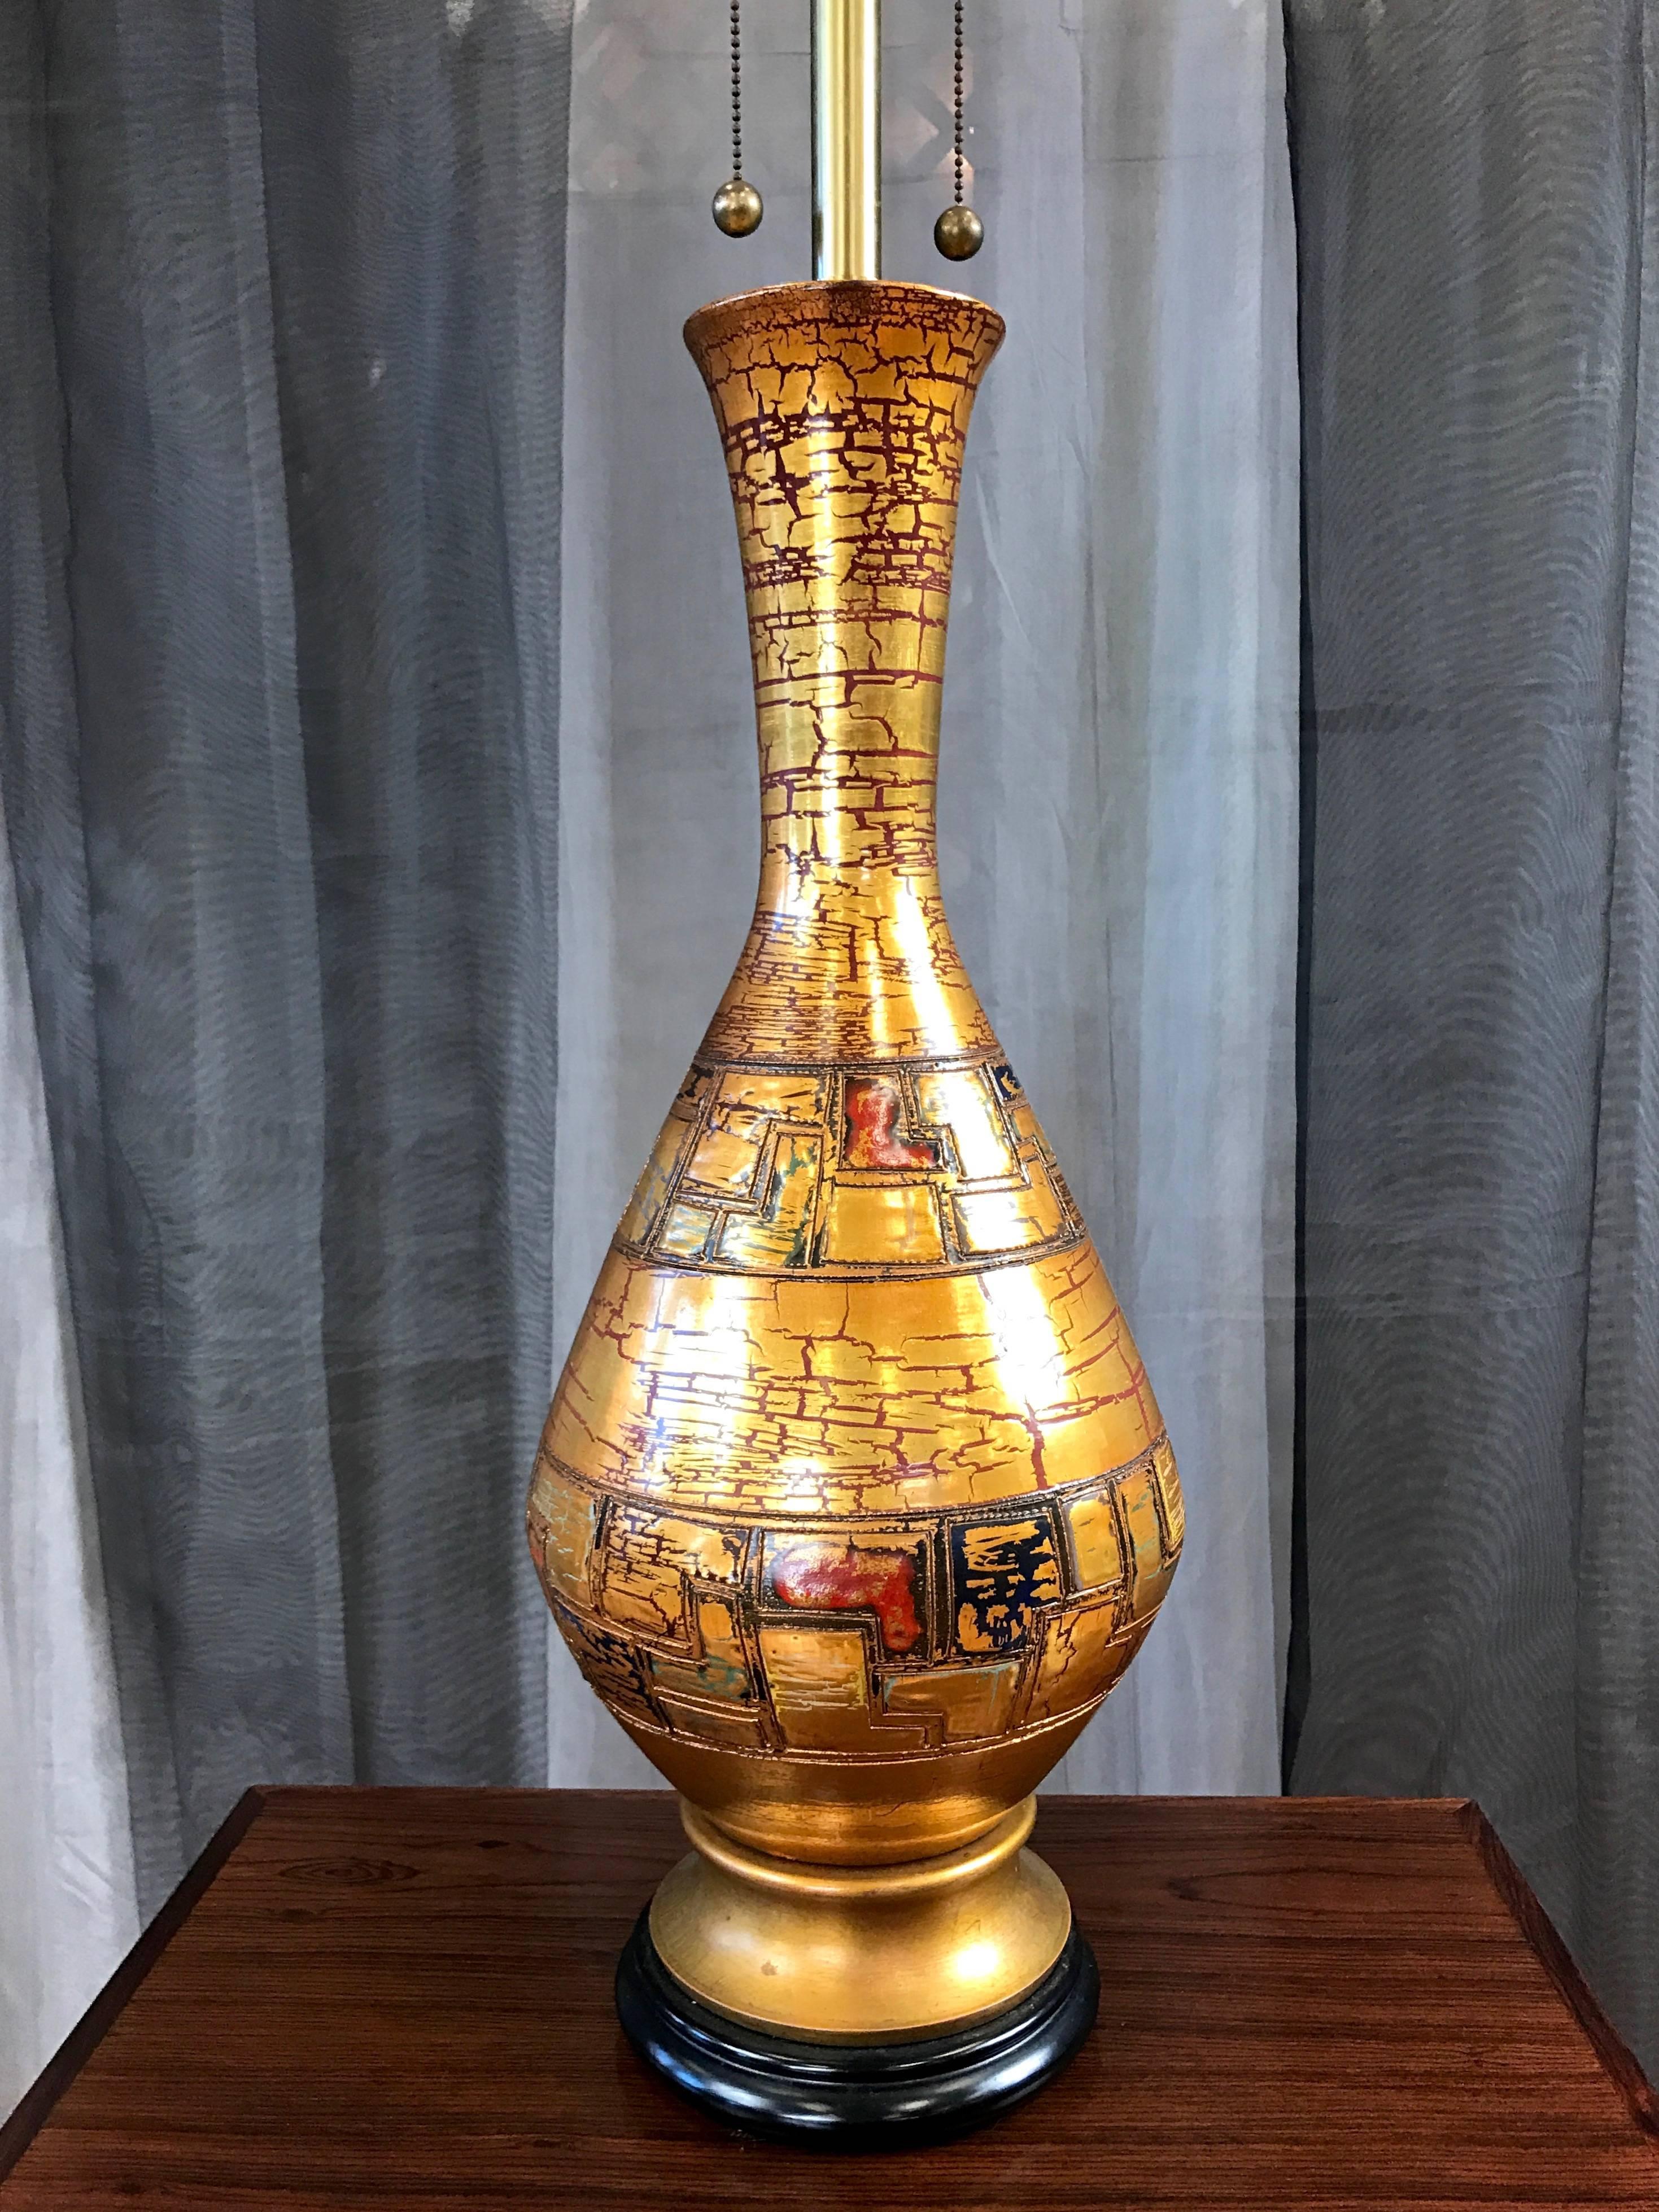 American Monumental Marbro Ceramic Table Lamp with Gold Crackle Glaze